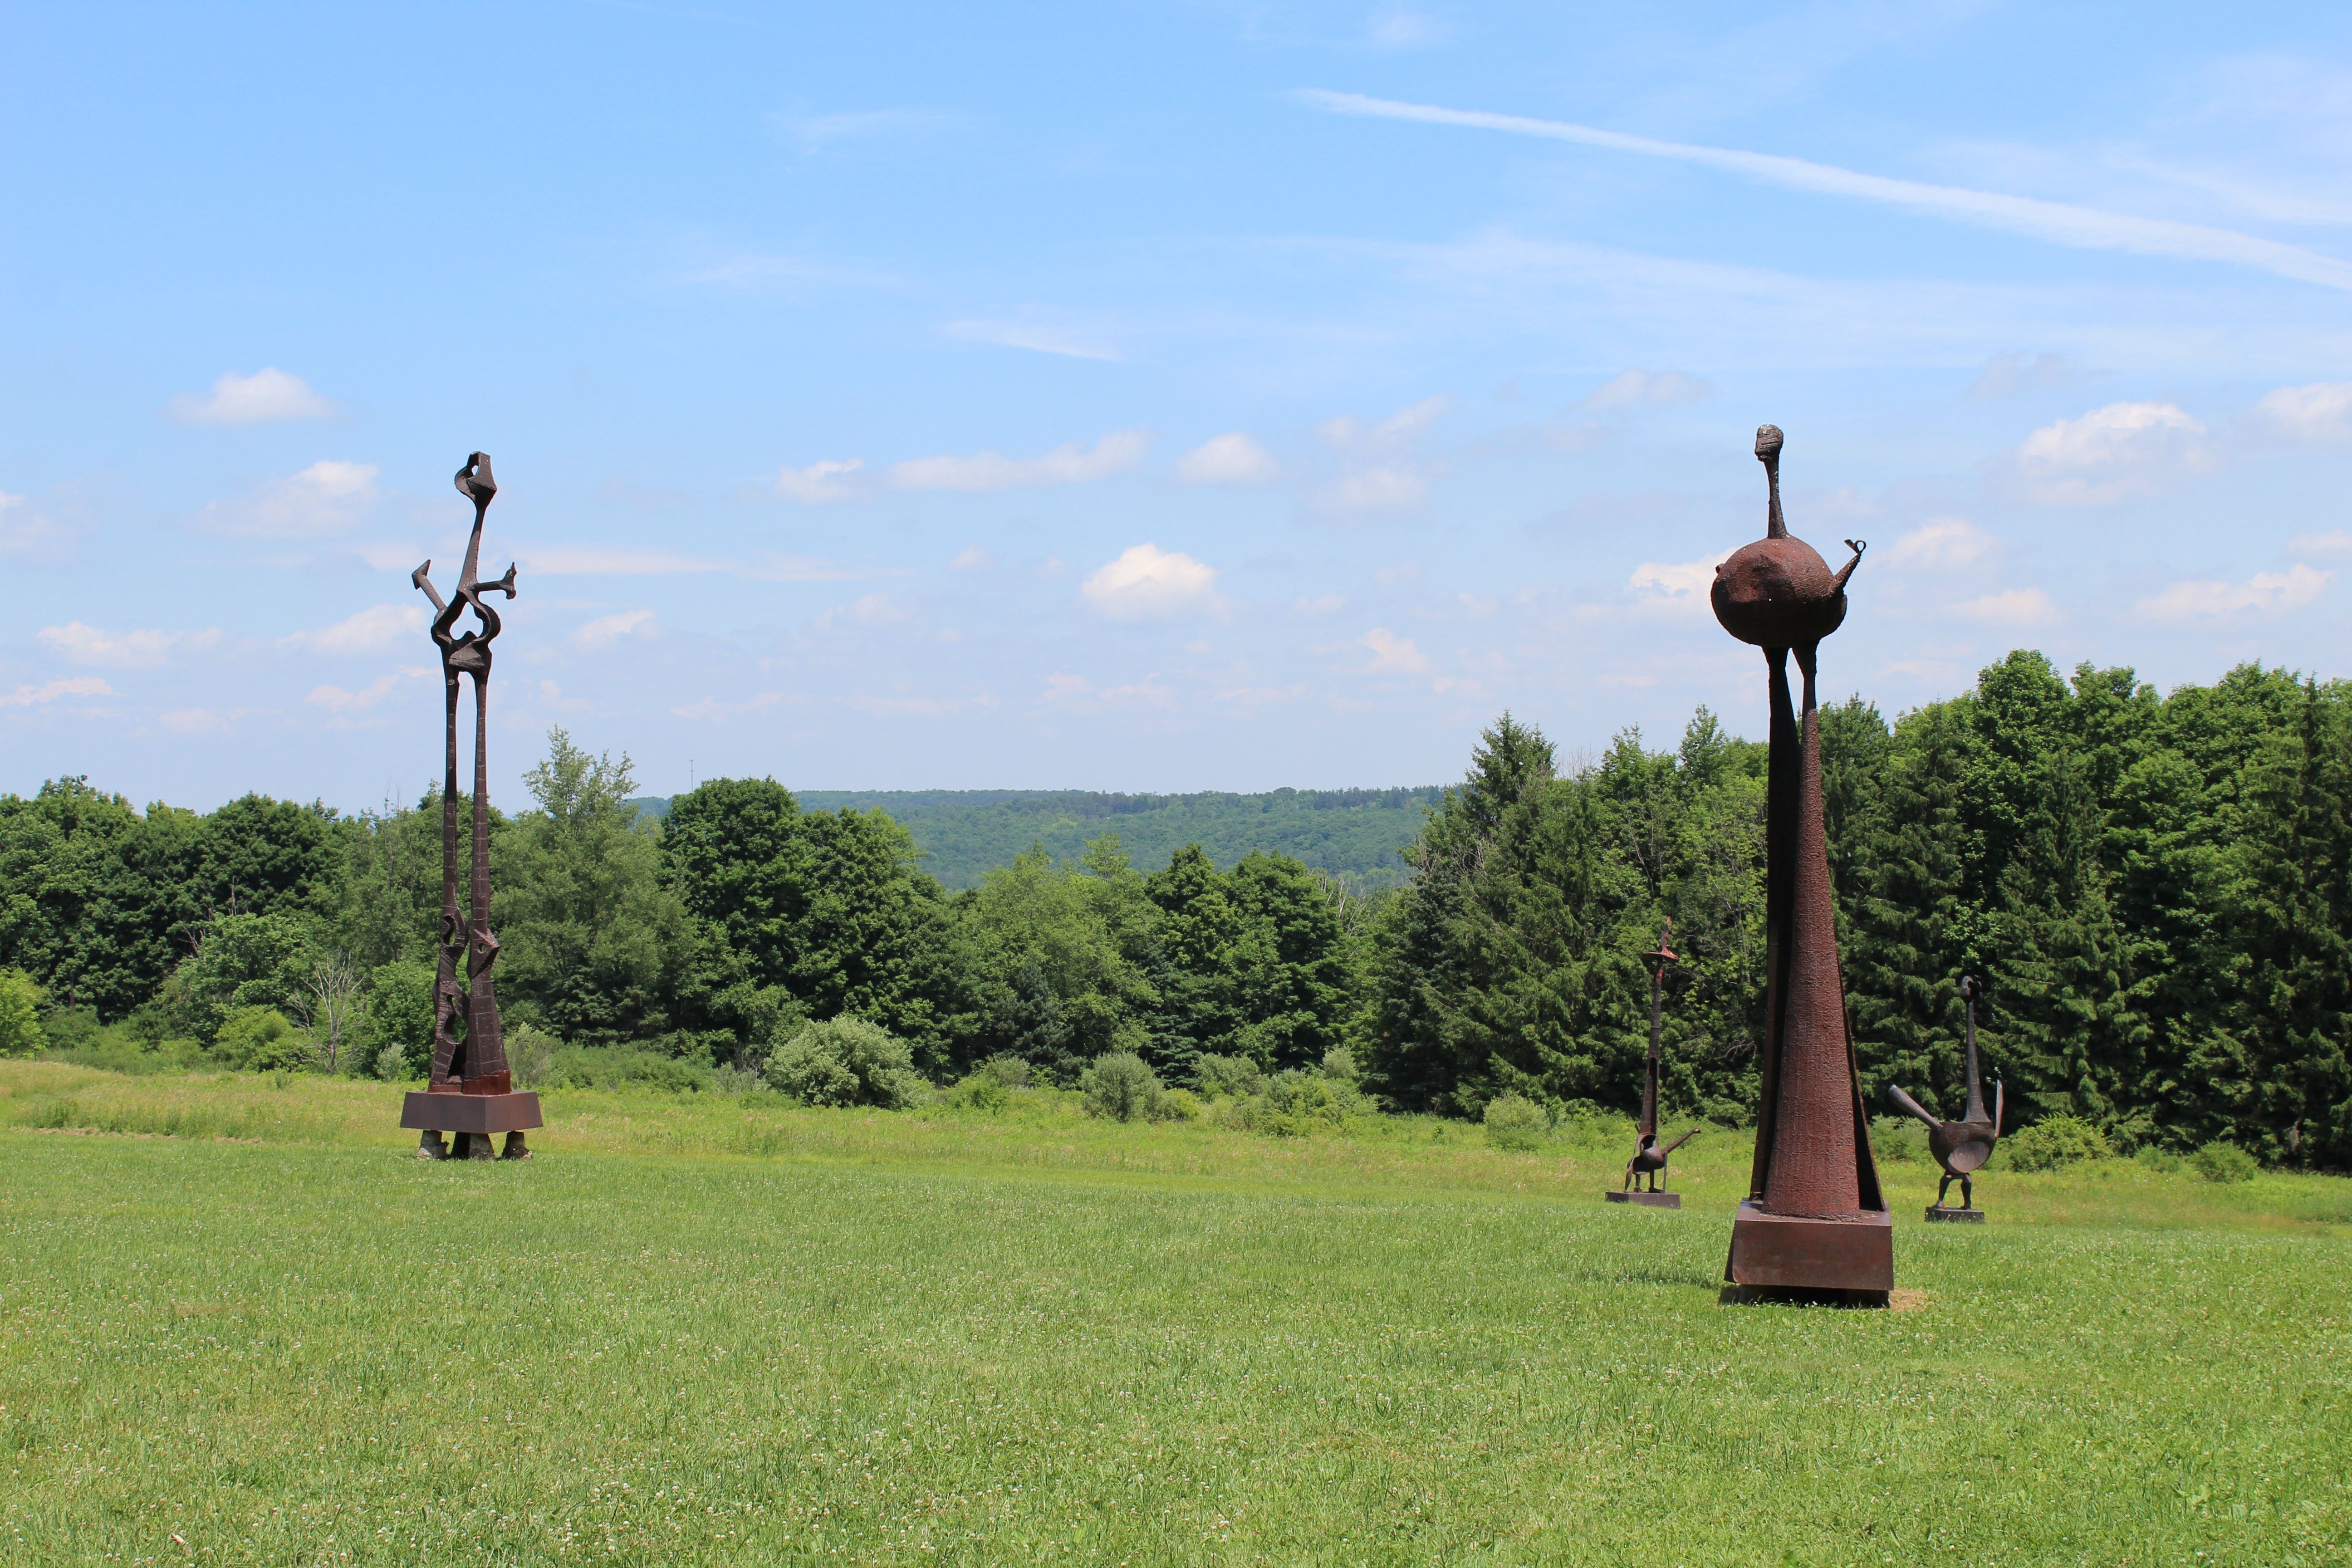 A photograph of Griffis Sculptue Park mid-day in relatively sunny weather. Multiple steel sculptures are displayed in a field, with woods in the background.